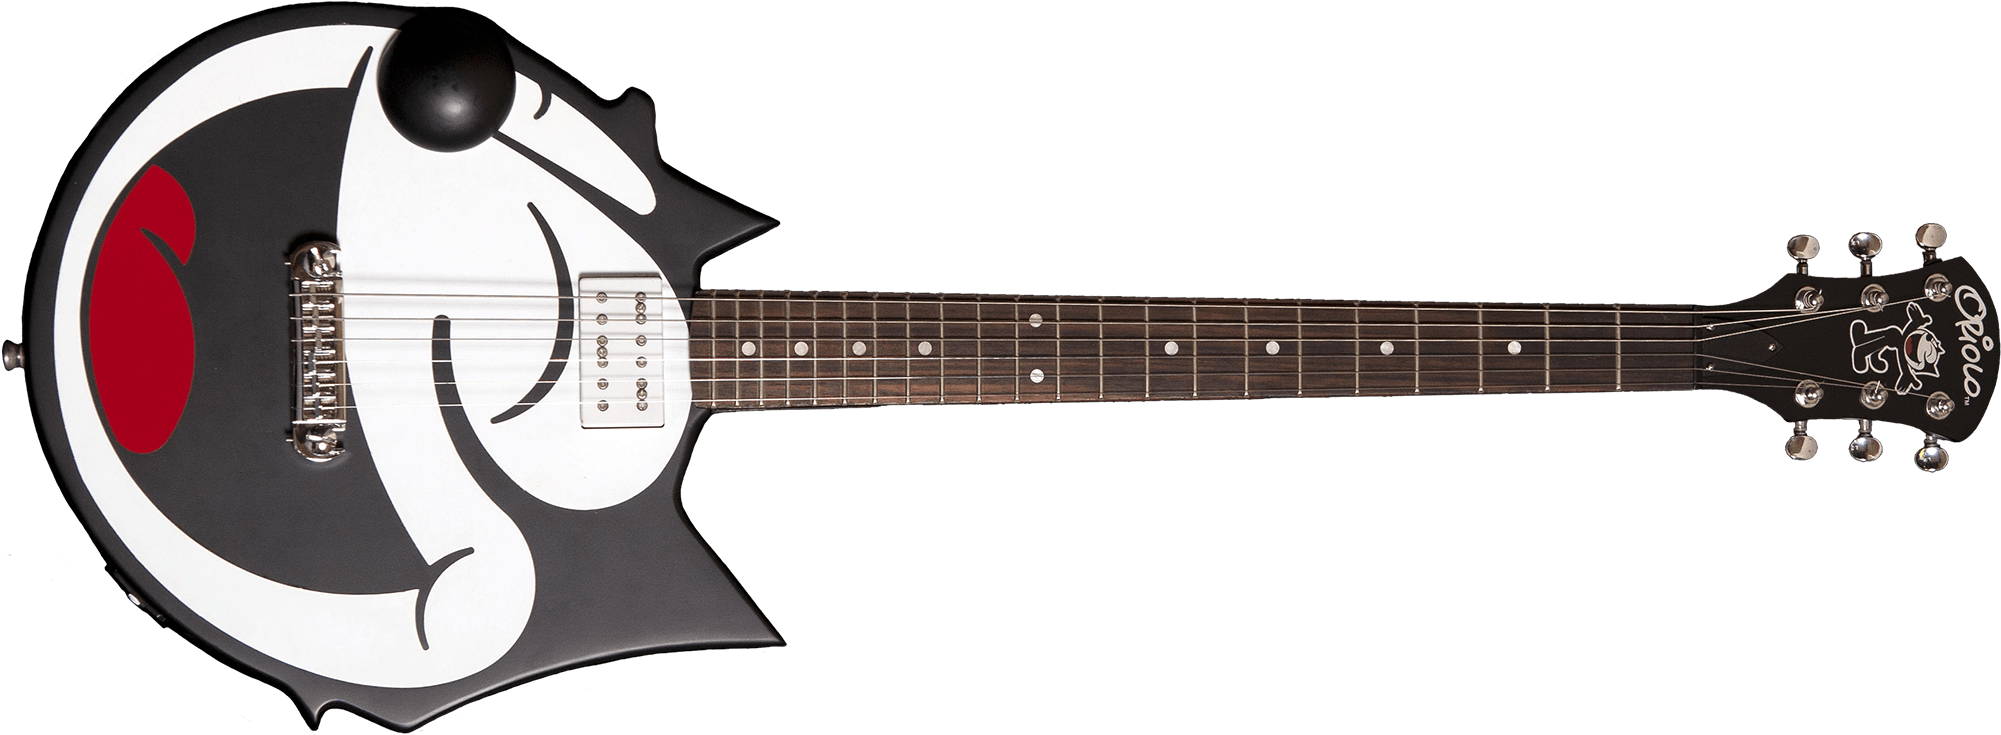 A Black And White Guitar